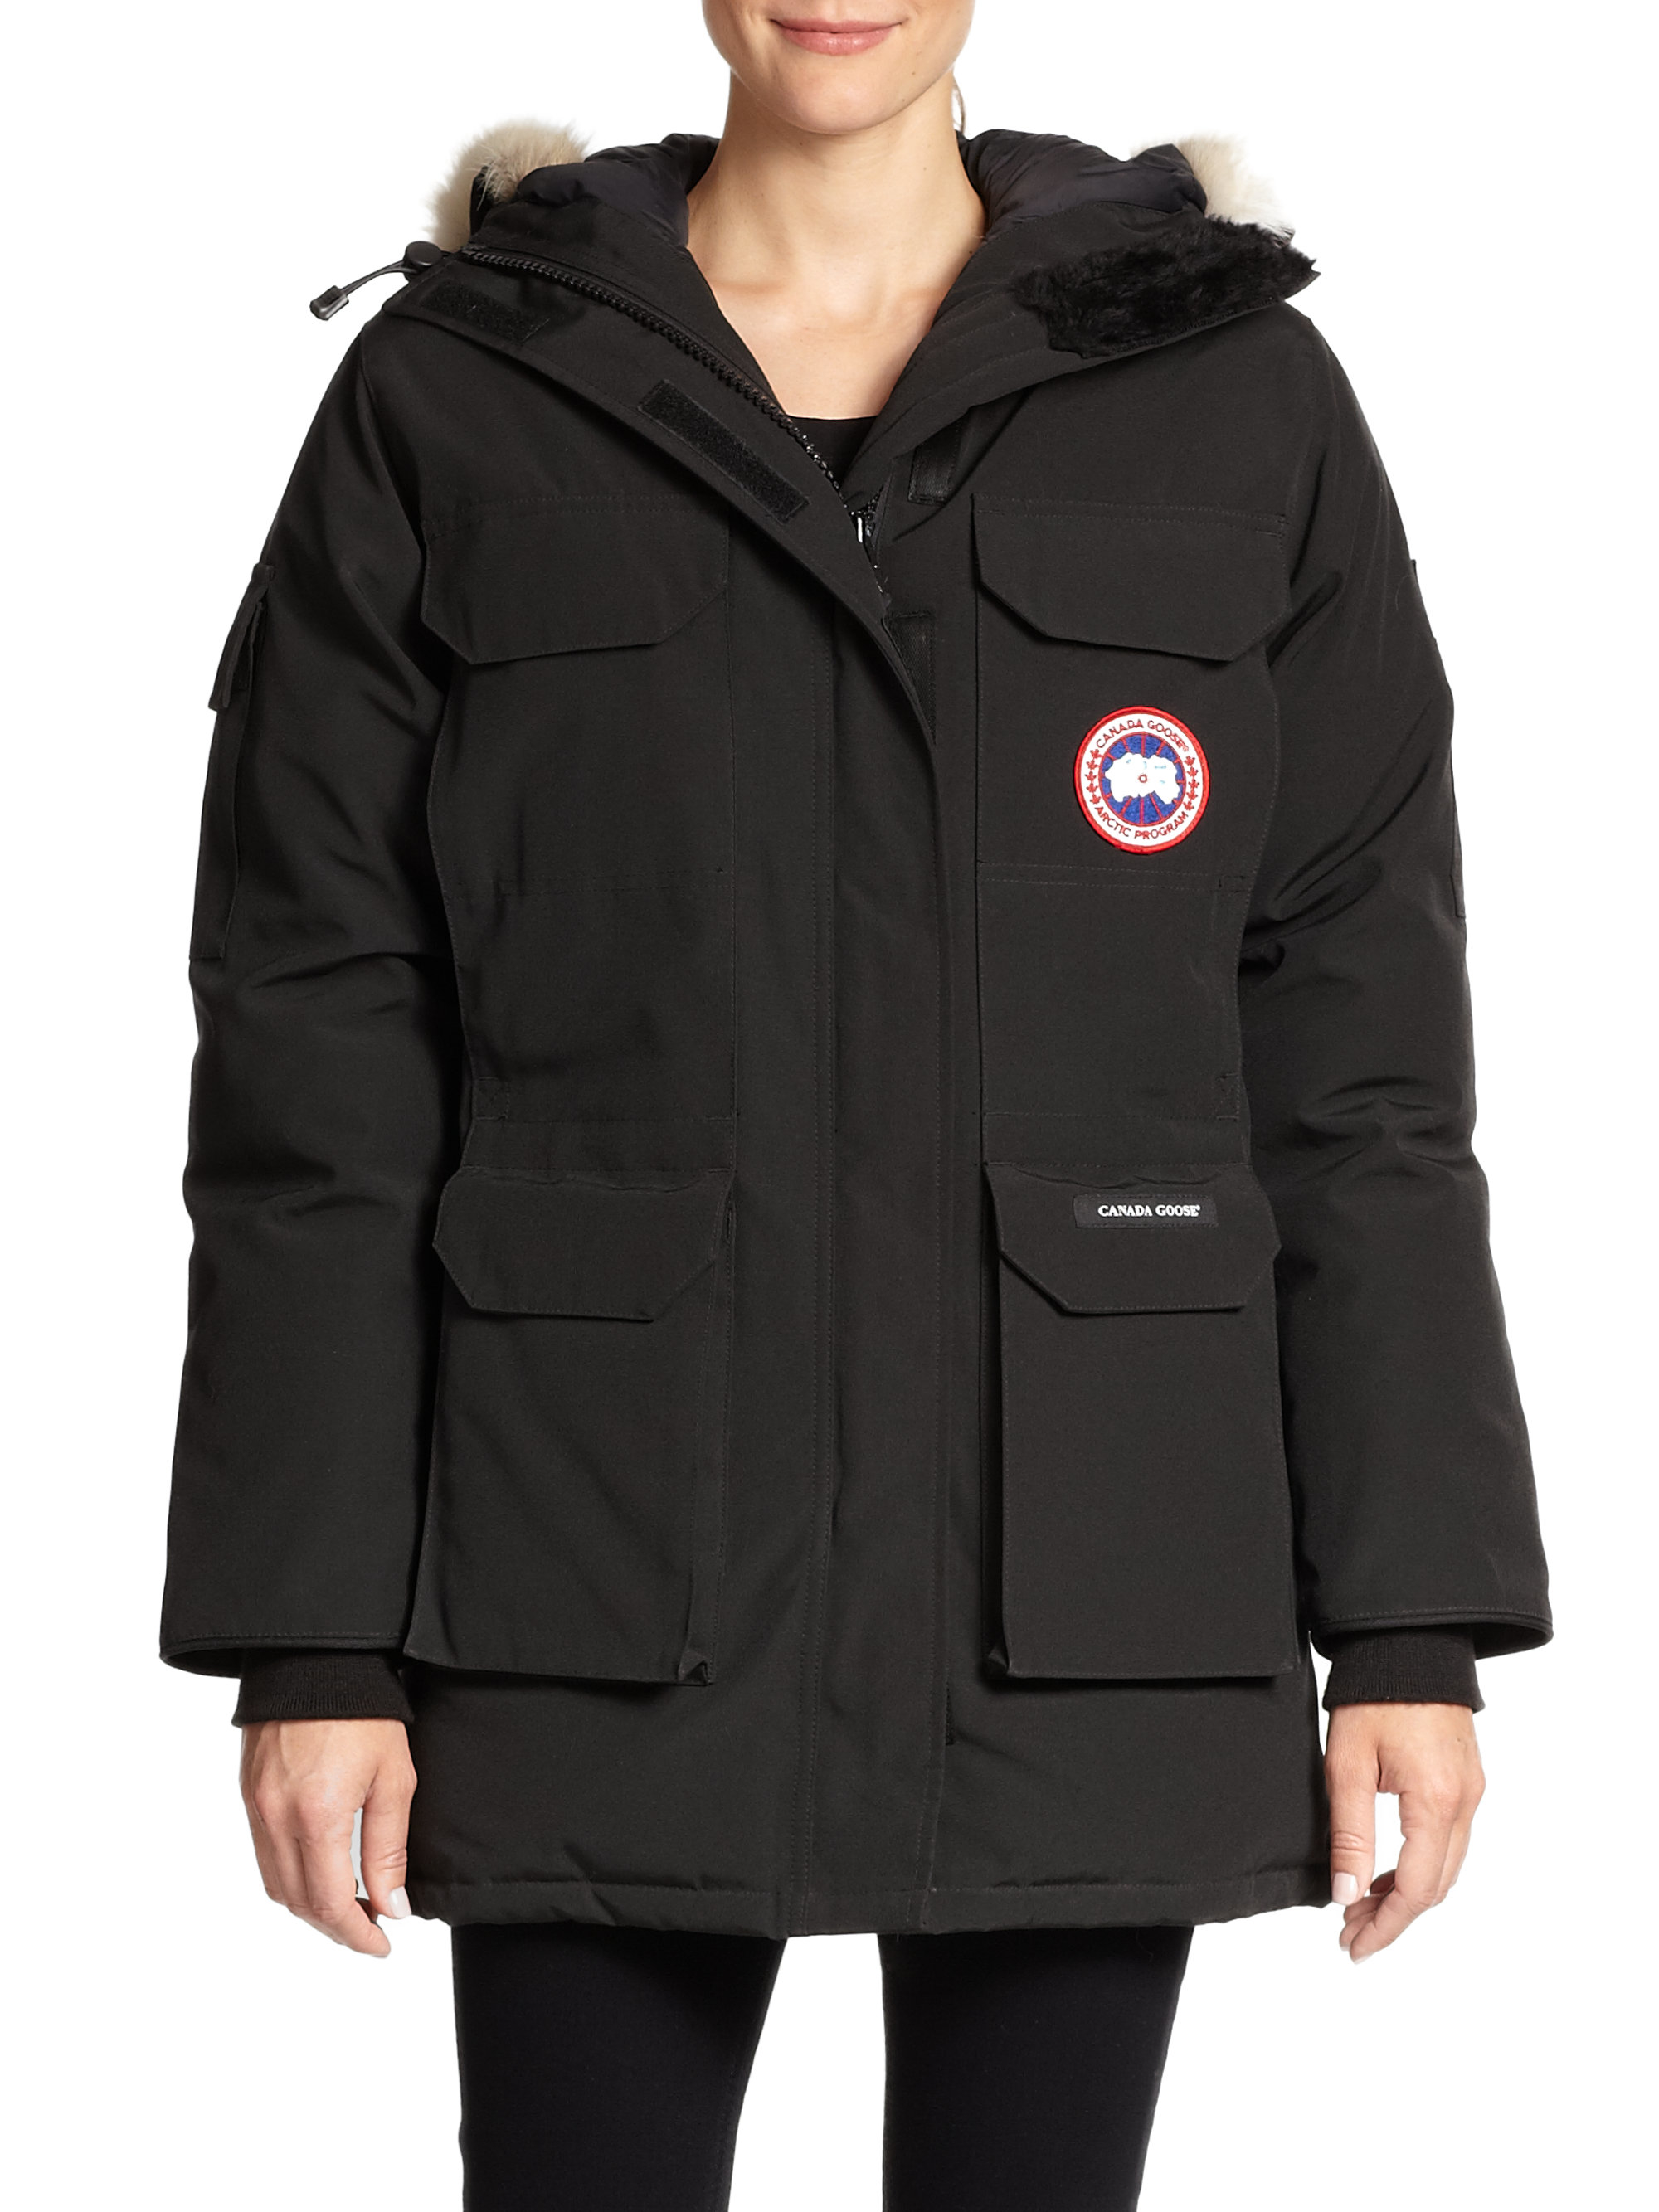 Lyst - Canada Goose Expedition Fur Trimmed Parka in Black